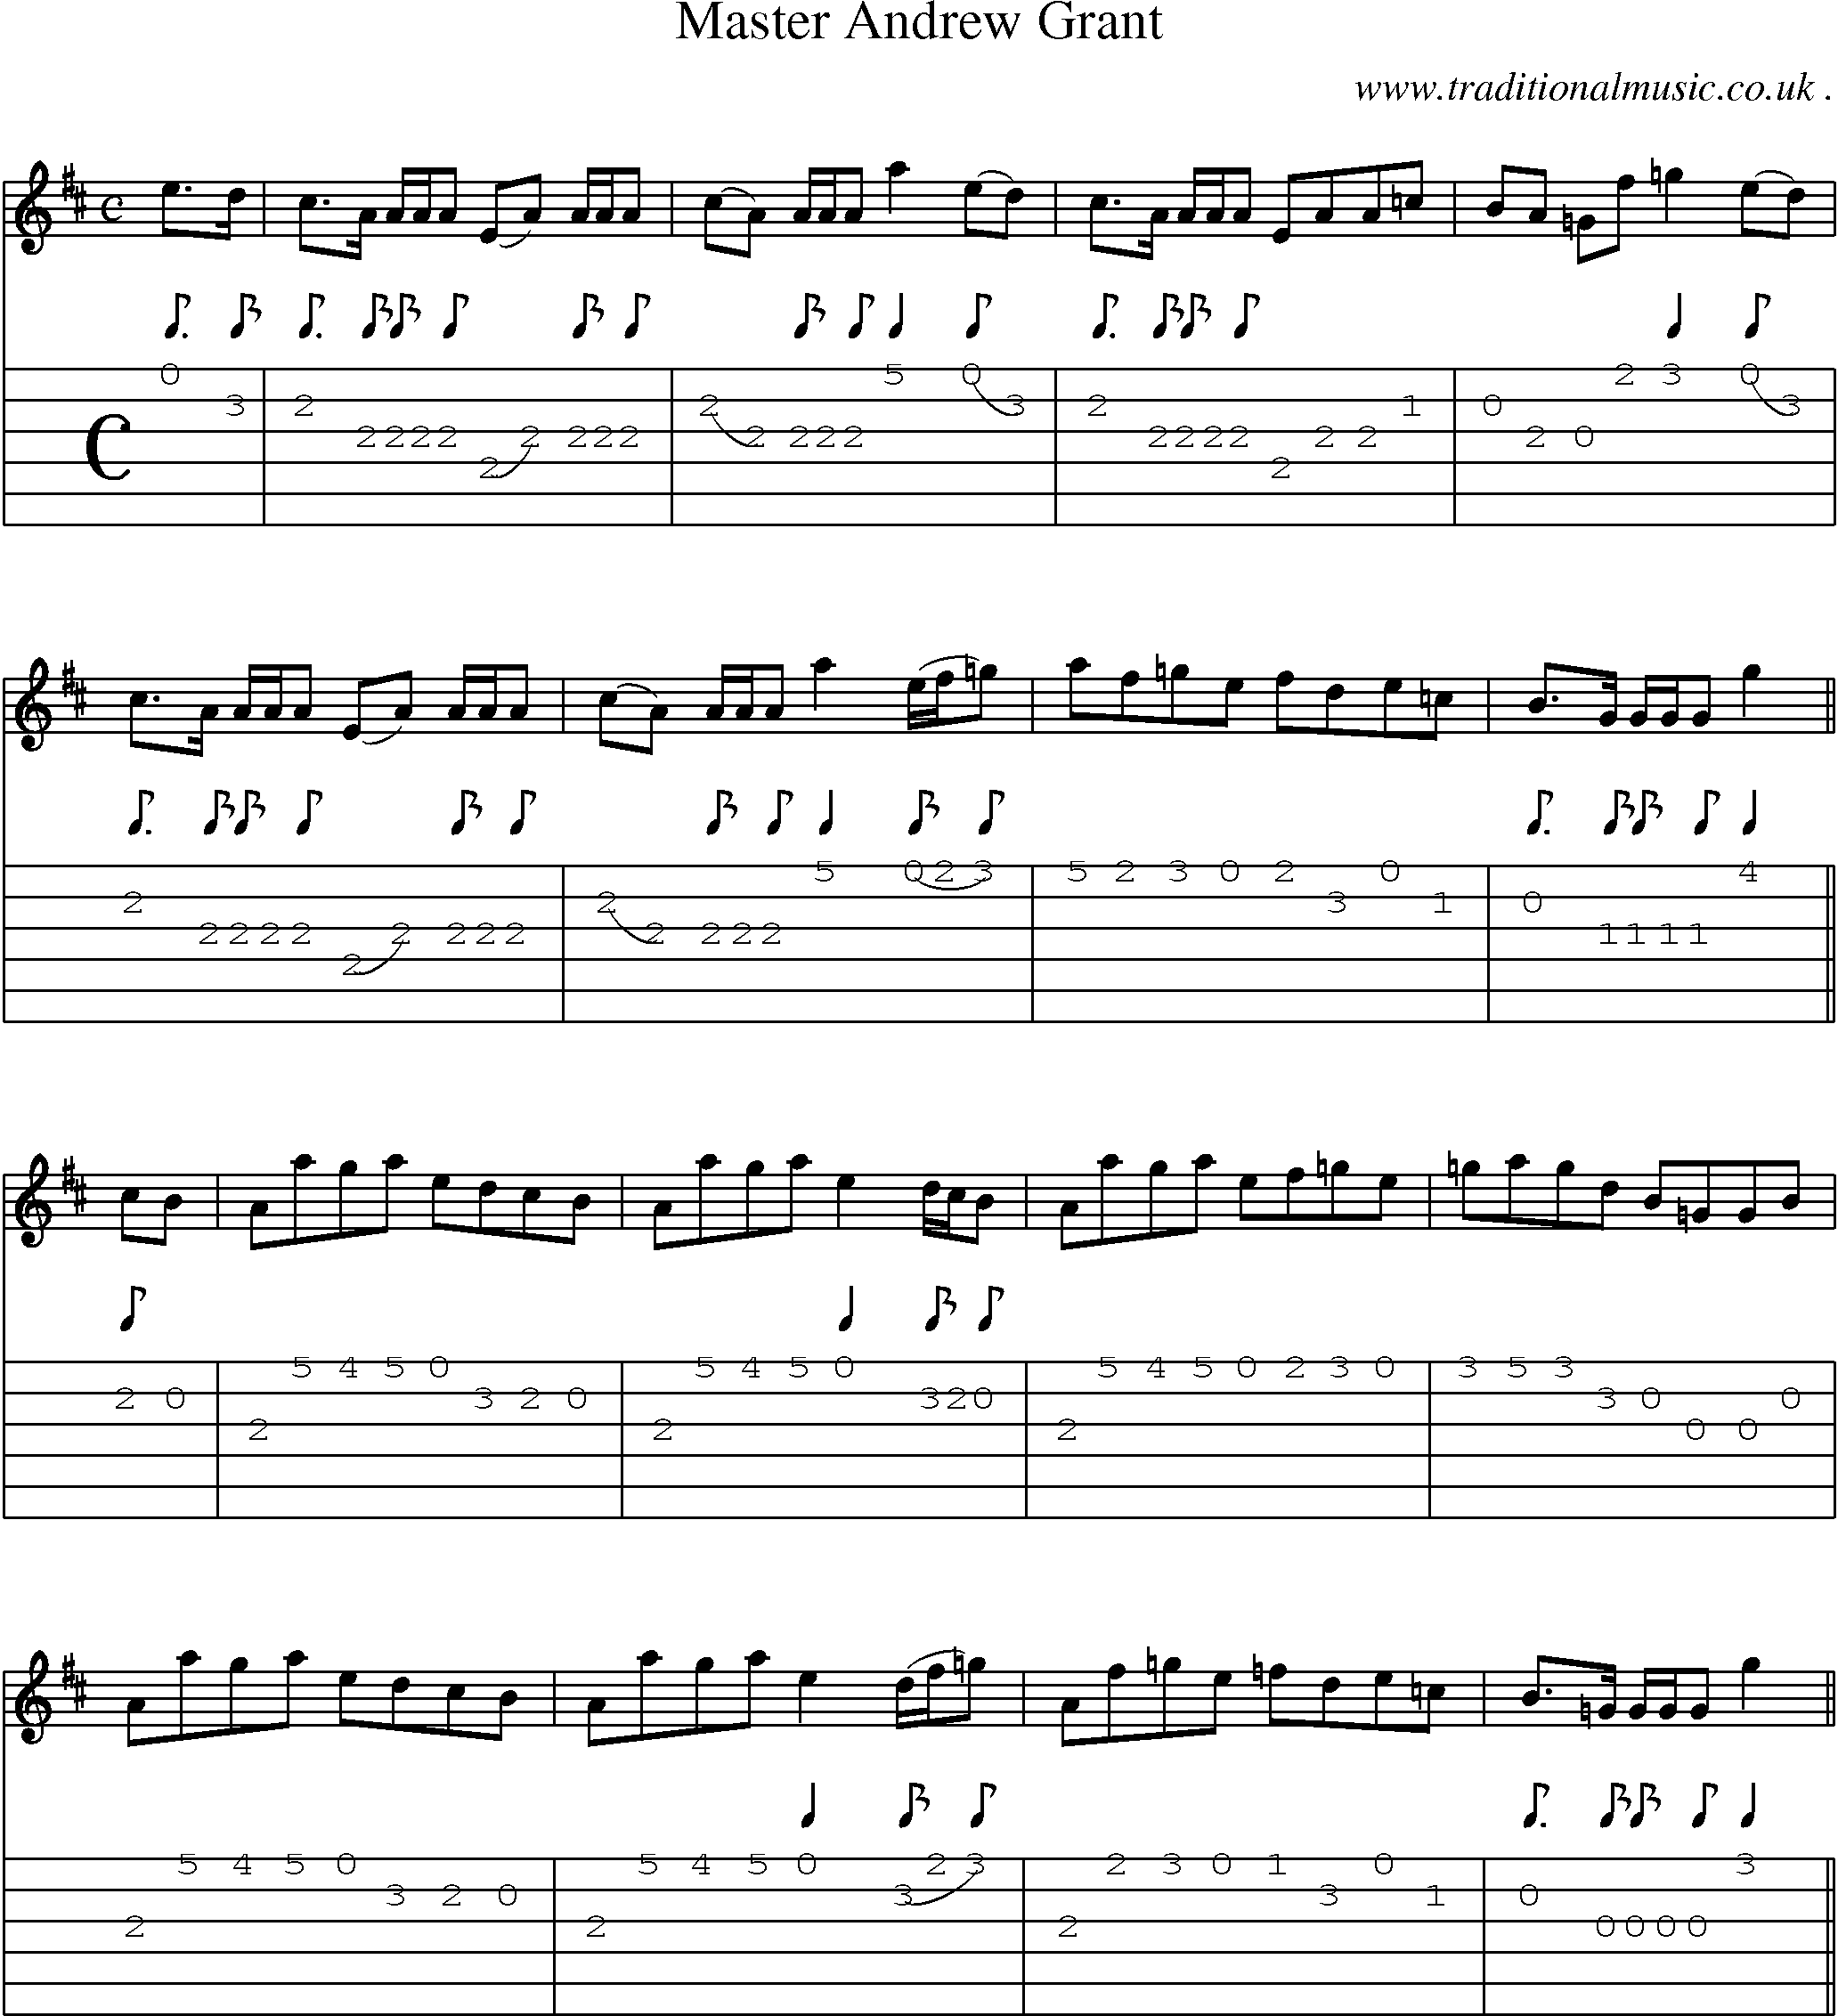 Sheet-music  score, Chords and Guitar Tabs for Master Andrew Grant